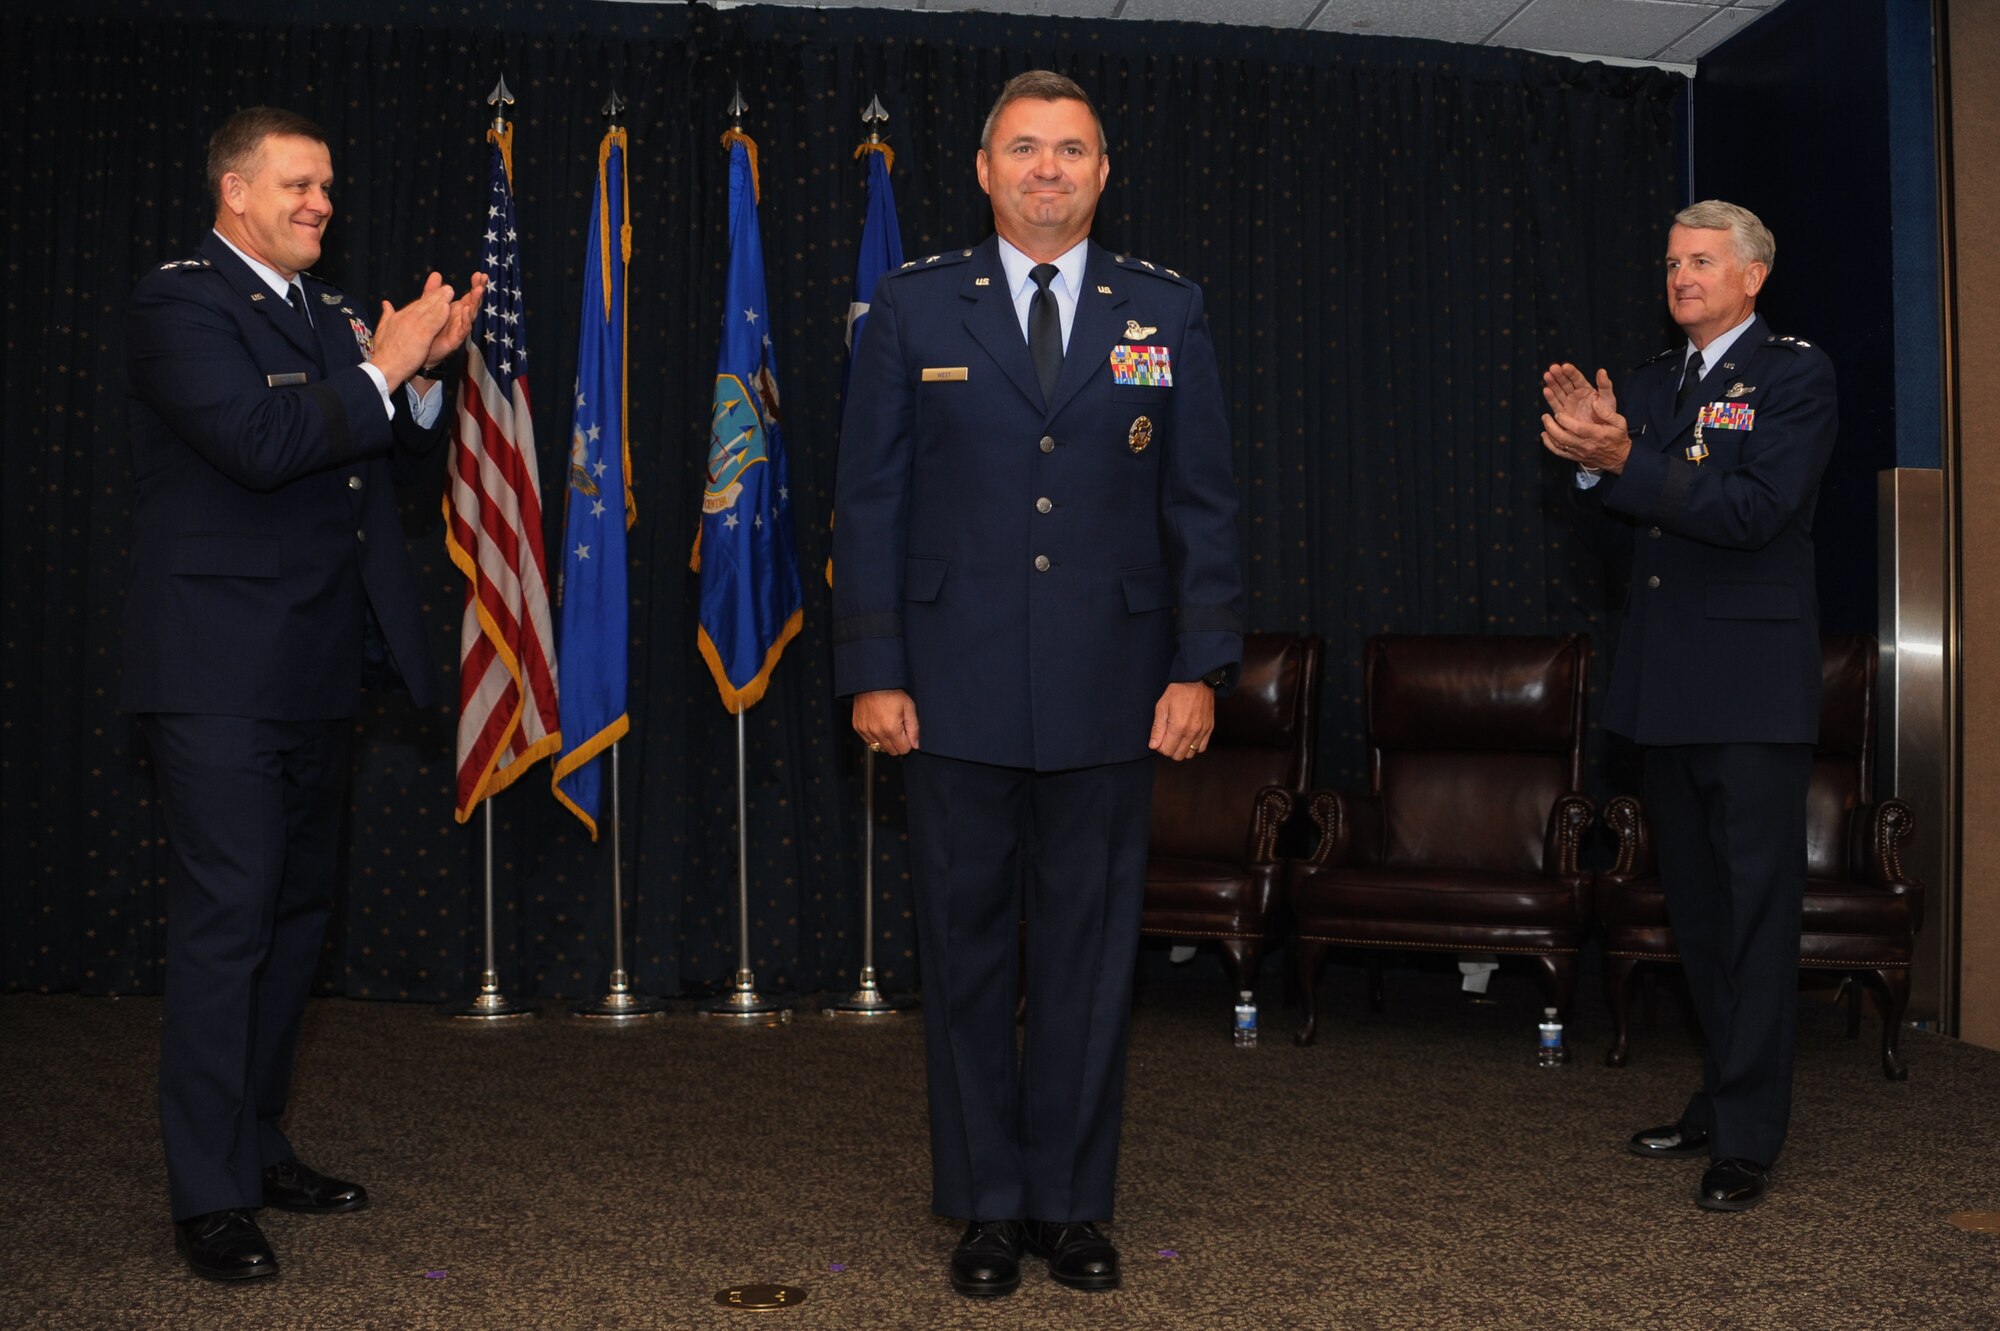 From the left: Assistant Vice Chief of Staff of the Air Force Lt. Gen. Frank Gorenc leads the applause for new Air Force Operational Test and Evaluation Commander Maj. Gen. Scott D. West joined by departing AFOTEC Commander Maj. Gen. David J. Eichhorn during a Sept. 13 change of command ceremony at Kirtland Air Force Base, N.M. (U.S. Air Force photo/Ken C. Moore)